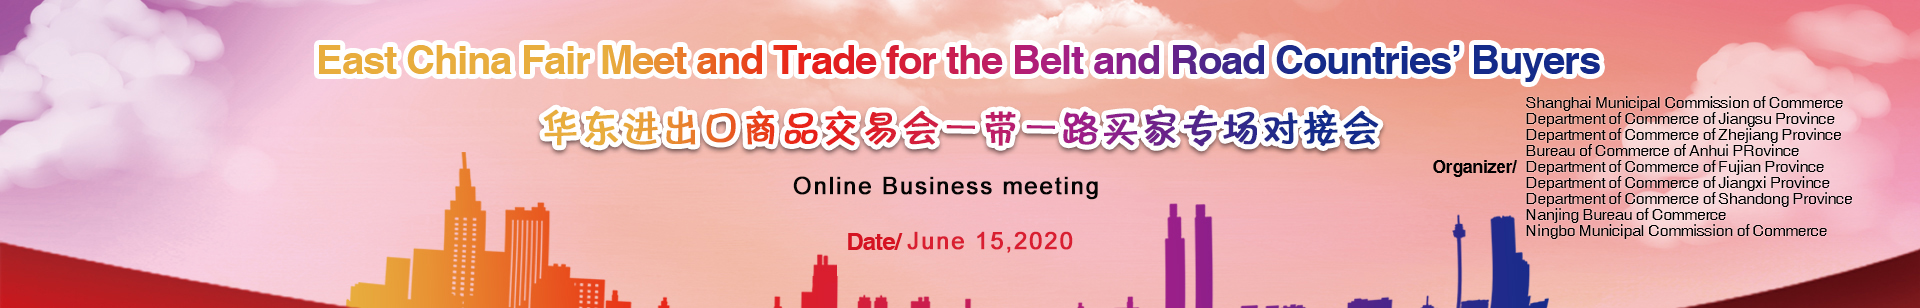 East China Fair Meet and Trade for the Belt and Road Countries’ Buyers